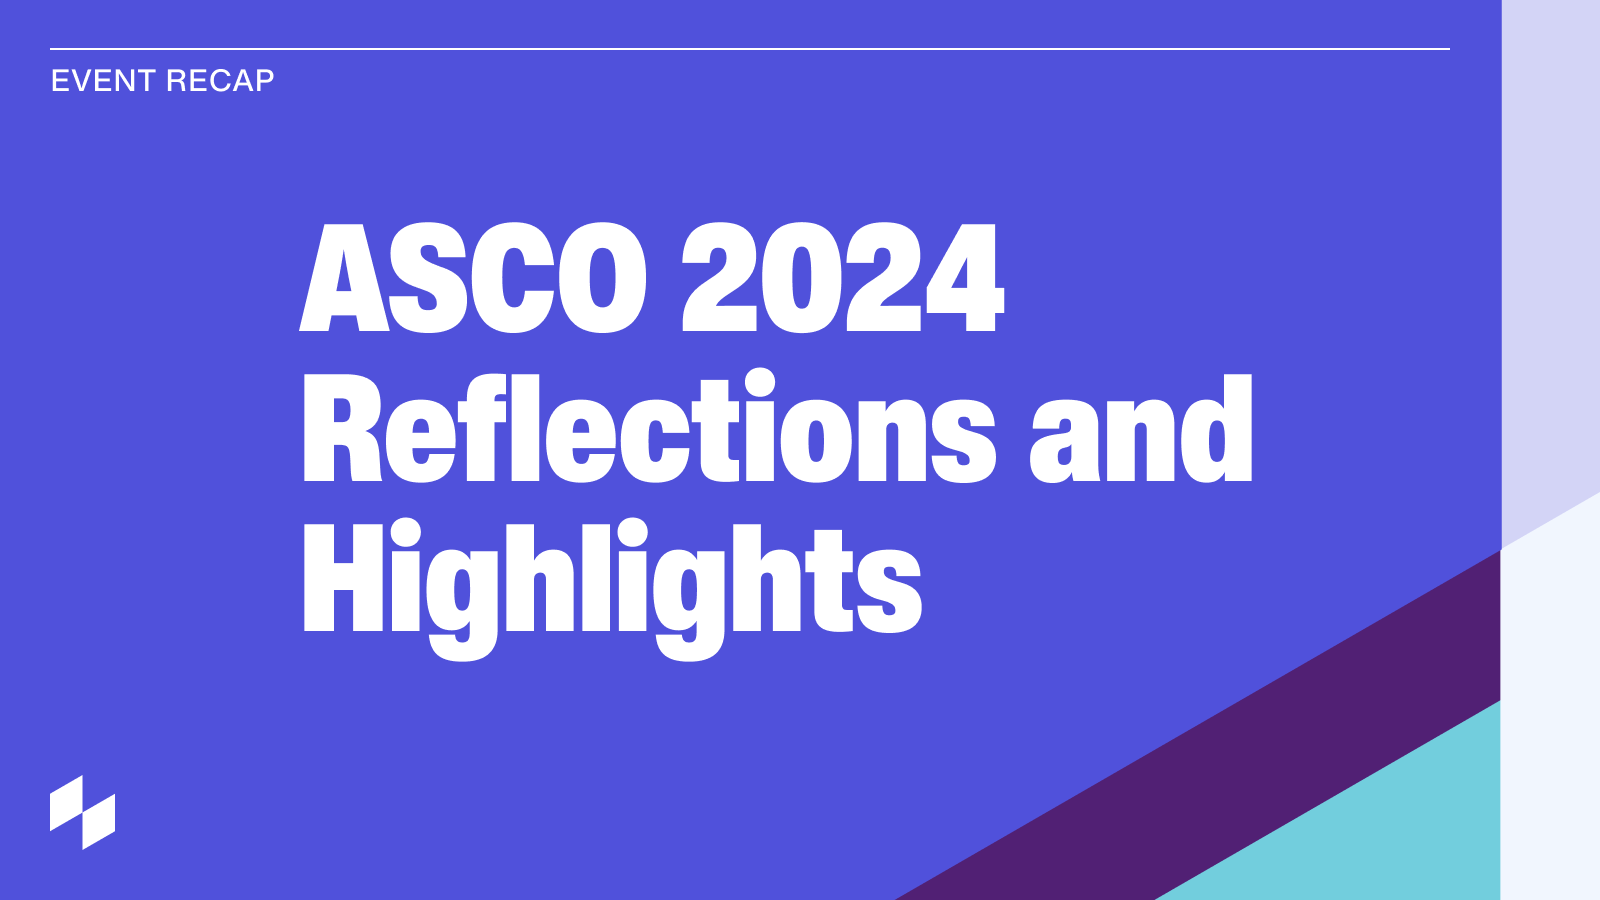 A thumbnail image that says Event recap, asco 2024 reflections and highlights, with colorful prismatic stripes in the background